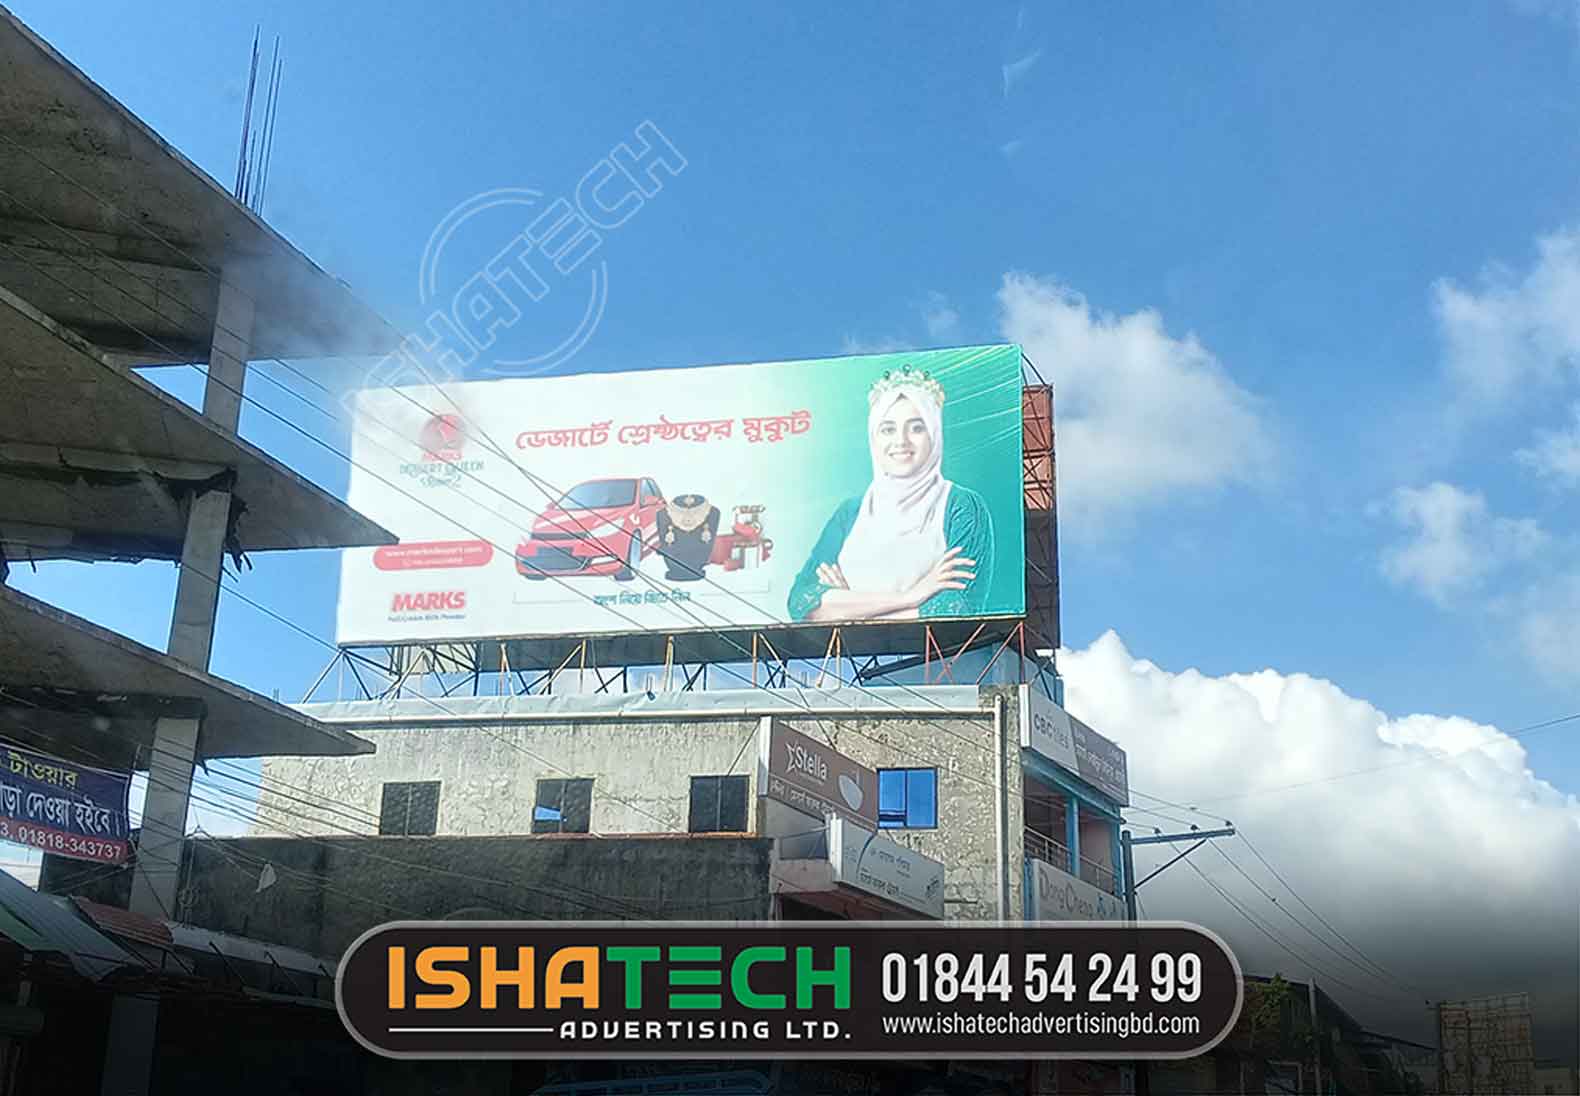 BILLBOARD BANNER DESIGN AND PRINTING SERVICE | Vinyl Billboard Printing Services | Billboard Banners - Billboard Printing for Resellers | Shop for Billboard Printing at Lowest Price